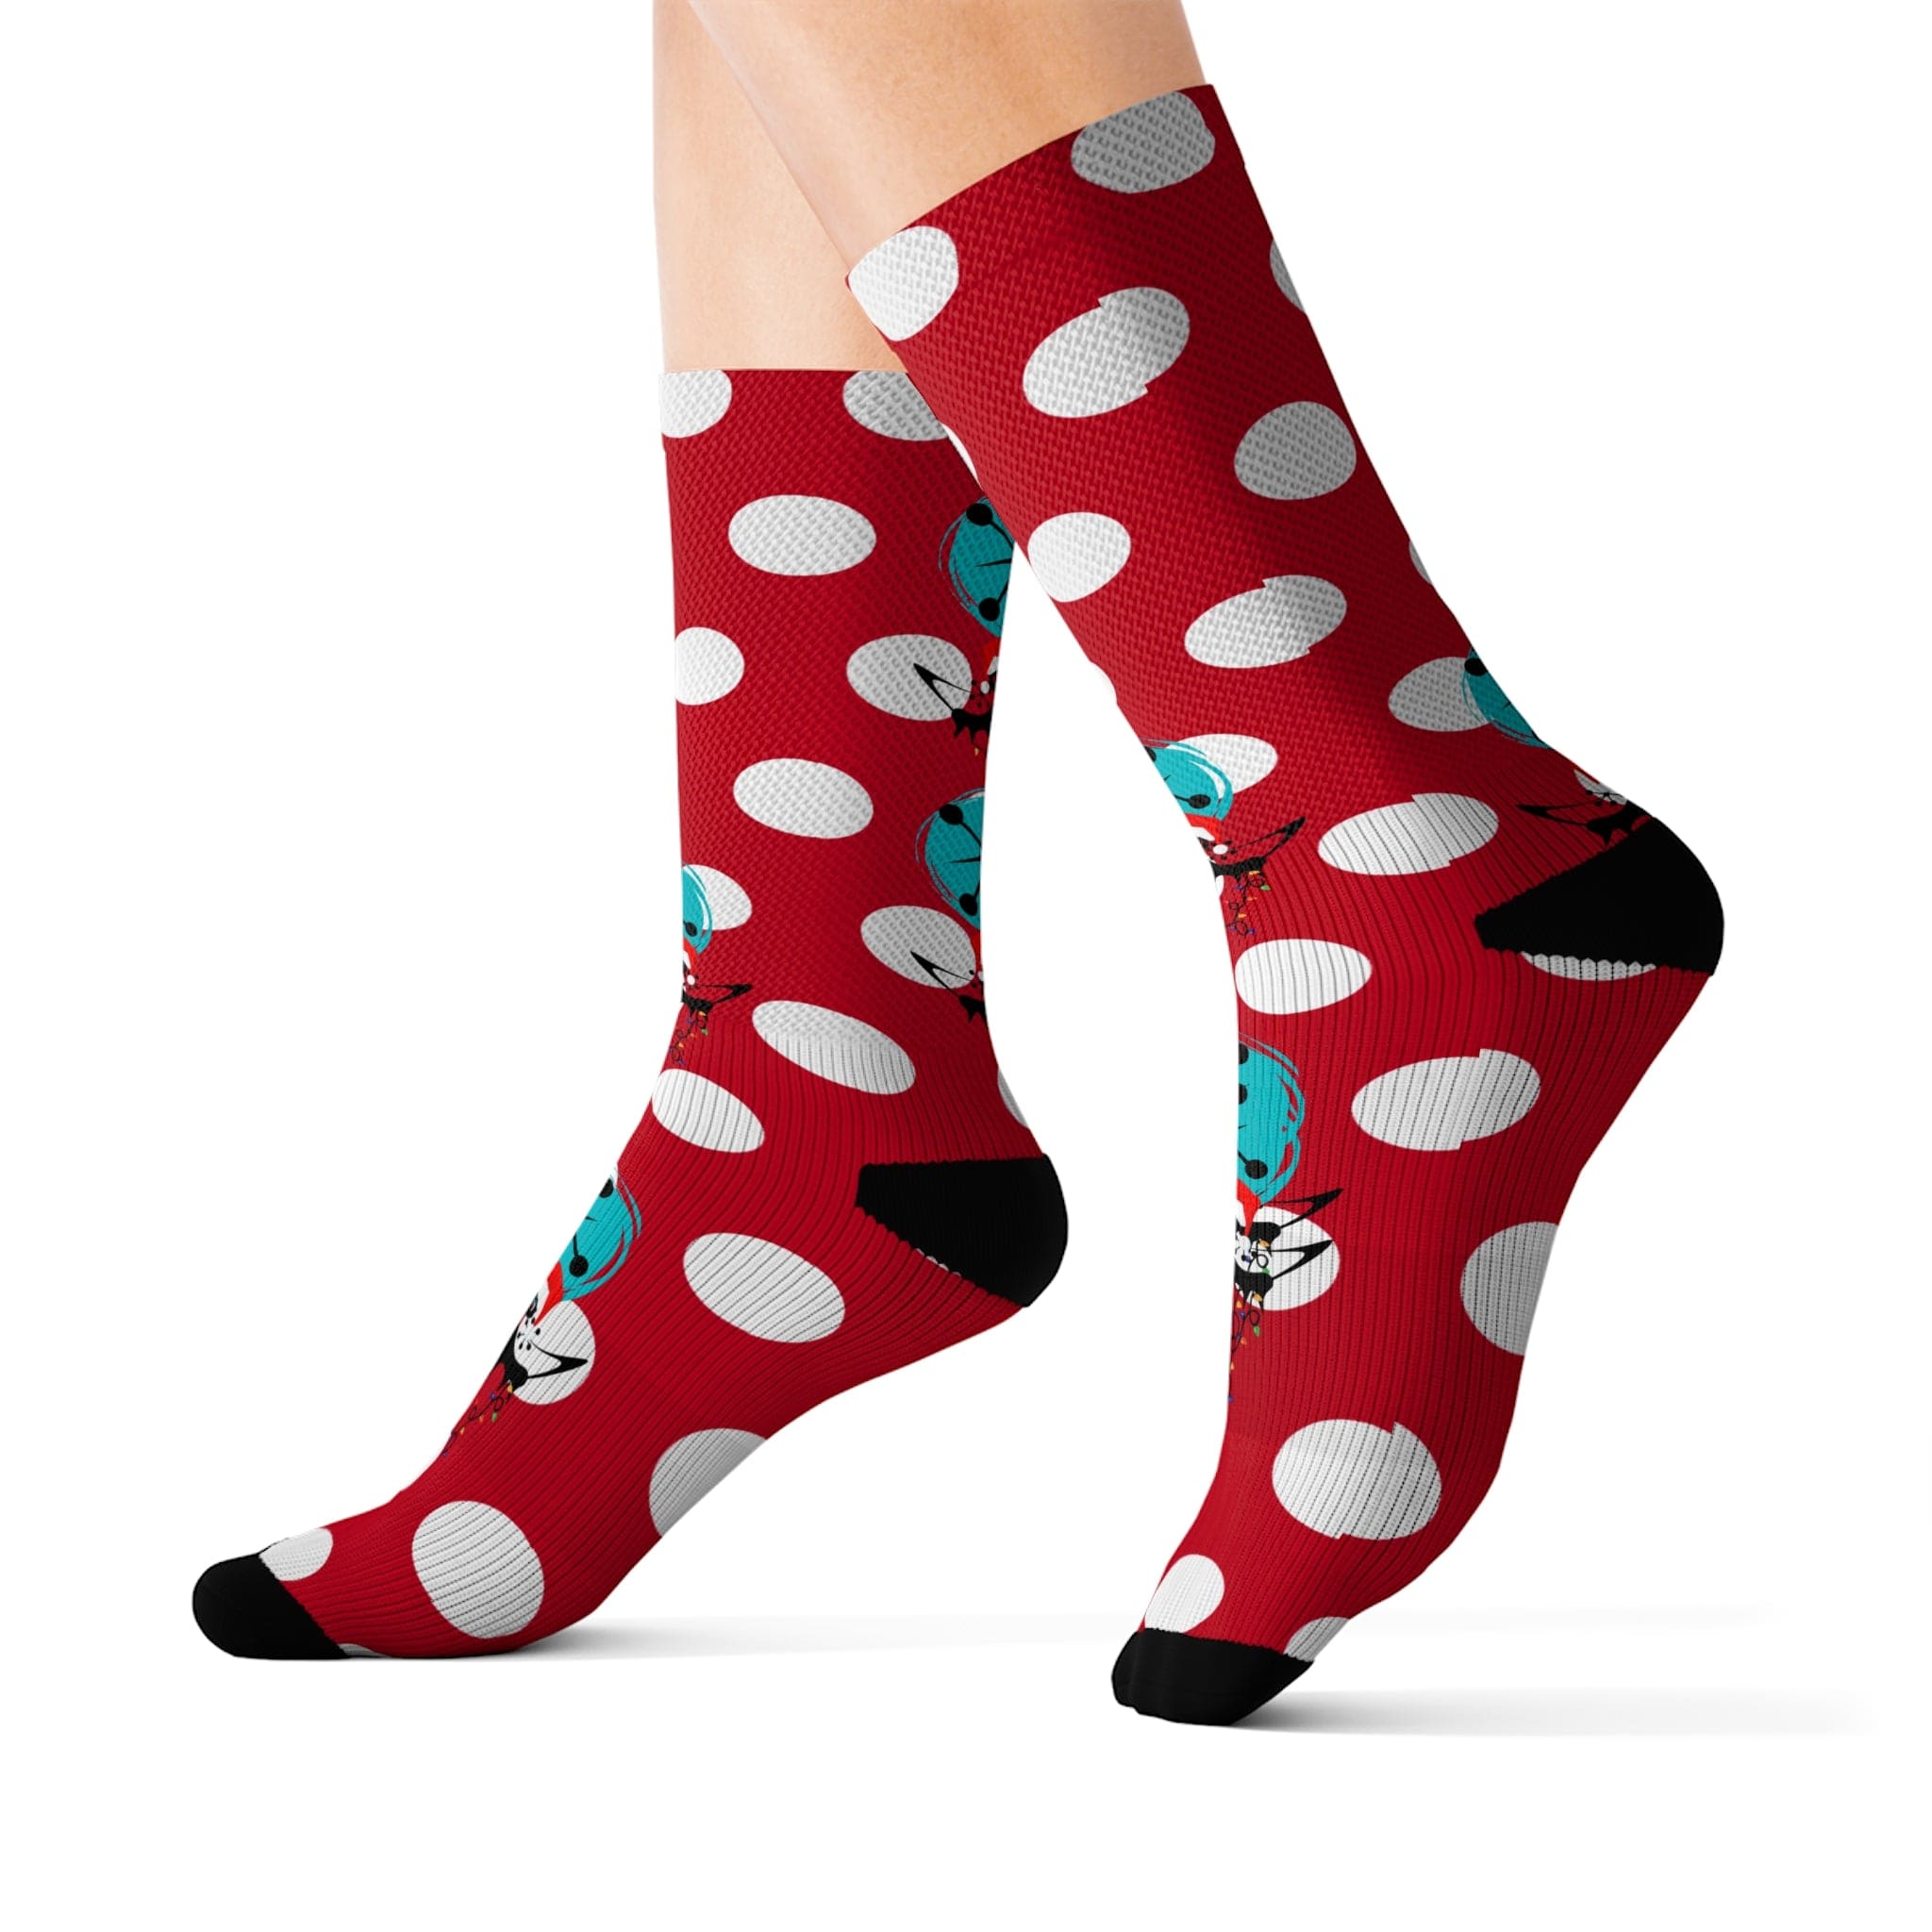 Christmas Socks, Red White, Polka Dot and Kitschy Crazy Atomic Cats  Socks All Over Prints M